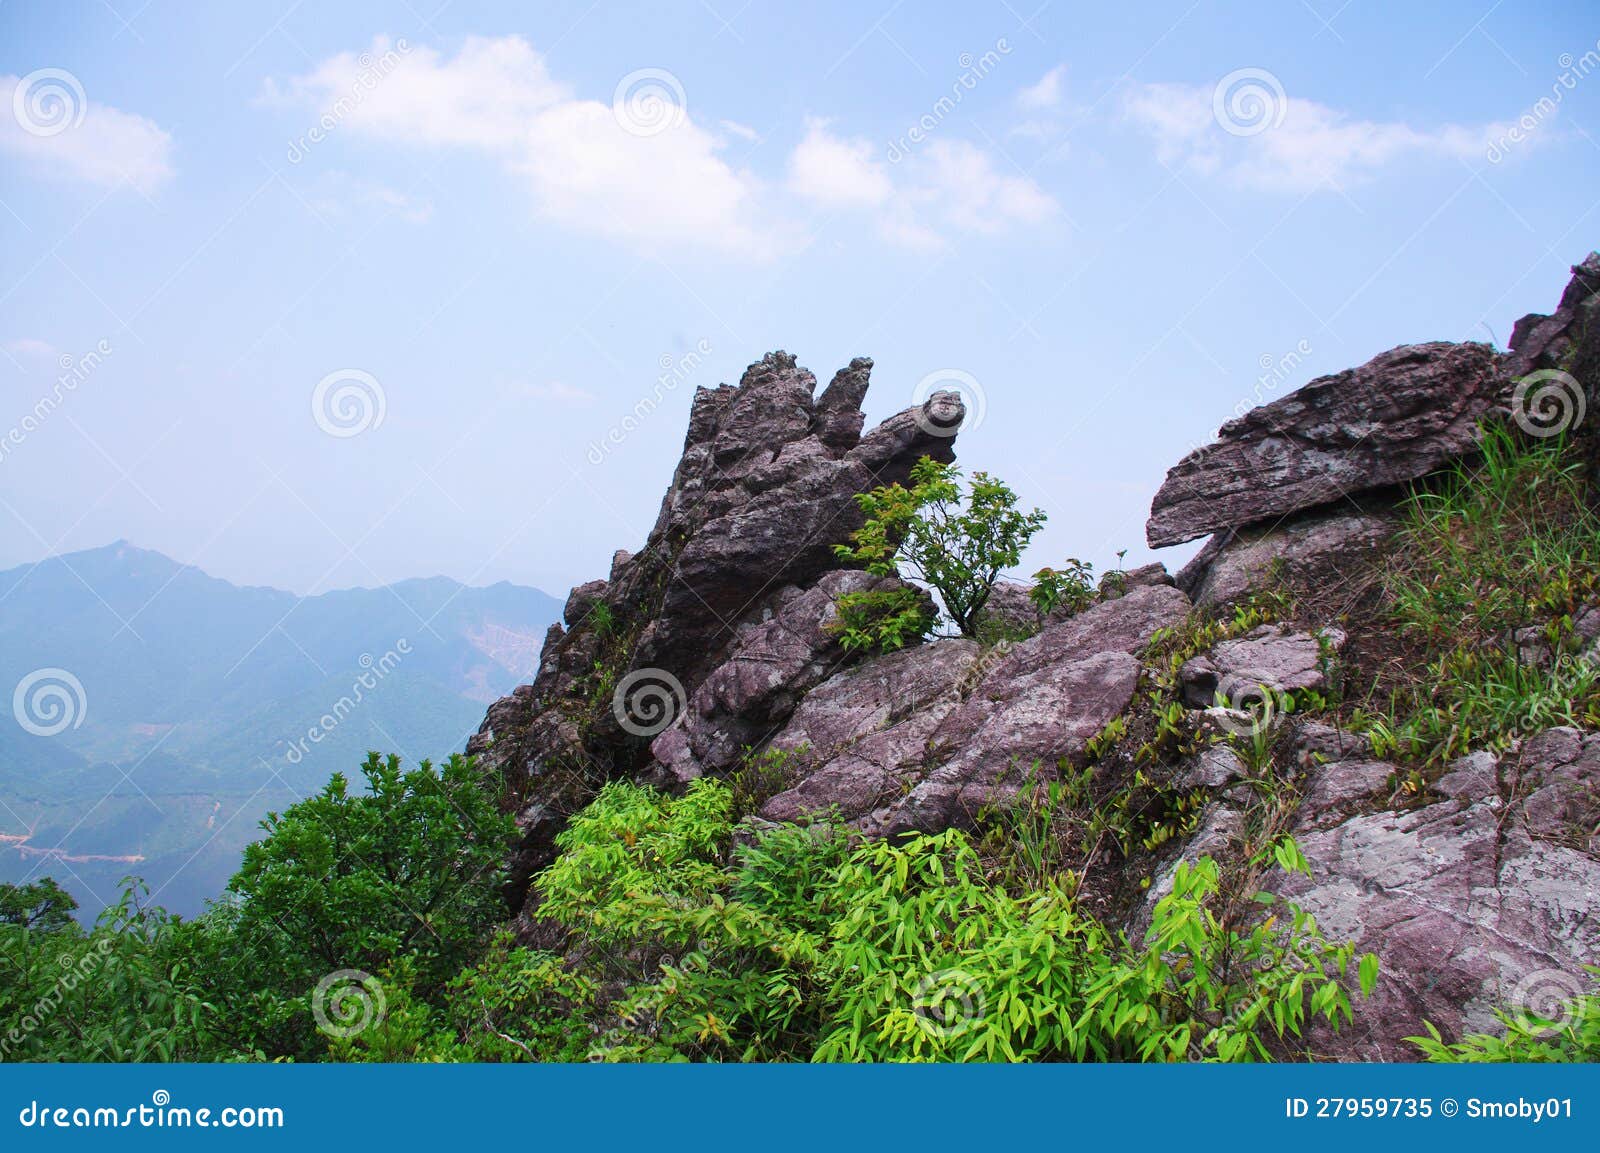 rocks on the top of mountain